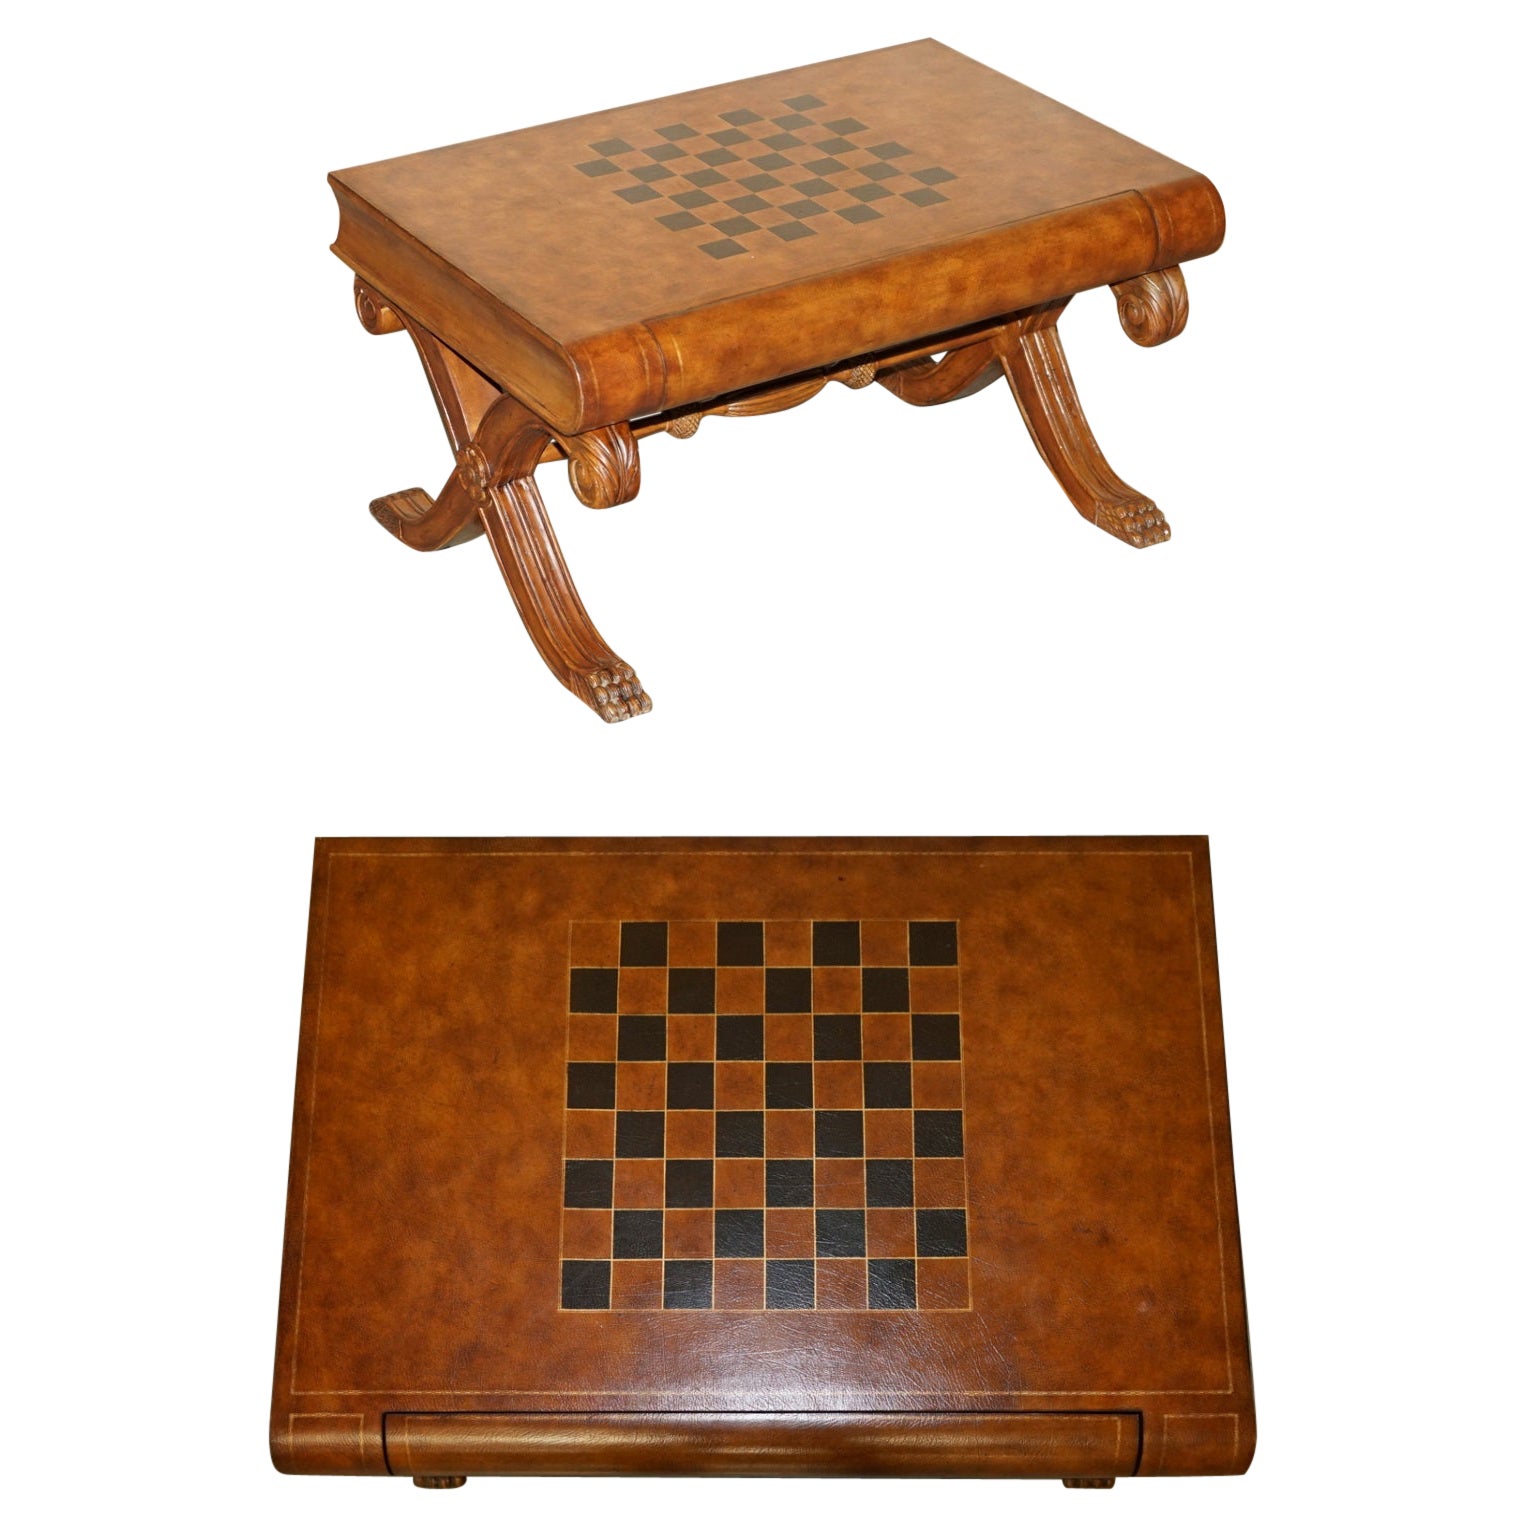 STUNNiNG HANDDYED BROWN LEATHER SCHOLARS BOOK CHESSBOARD CHESS COFFEE TABLE im Angebot